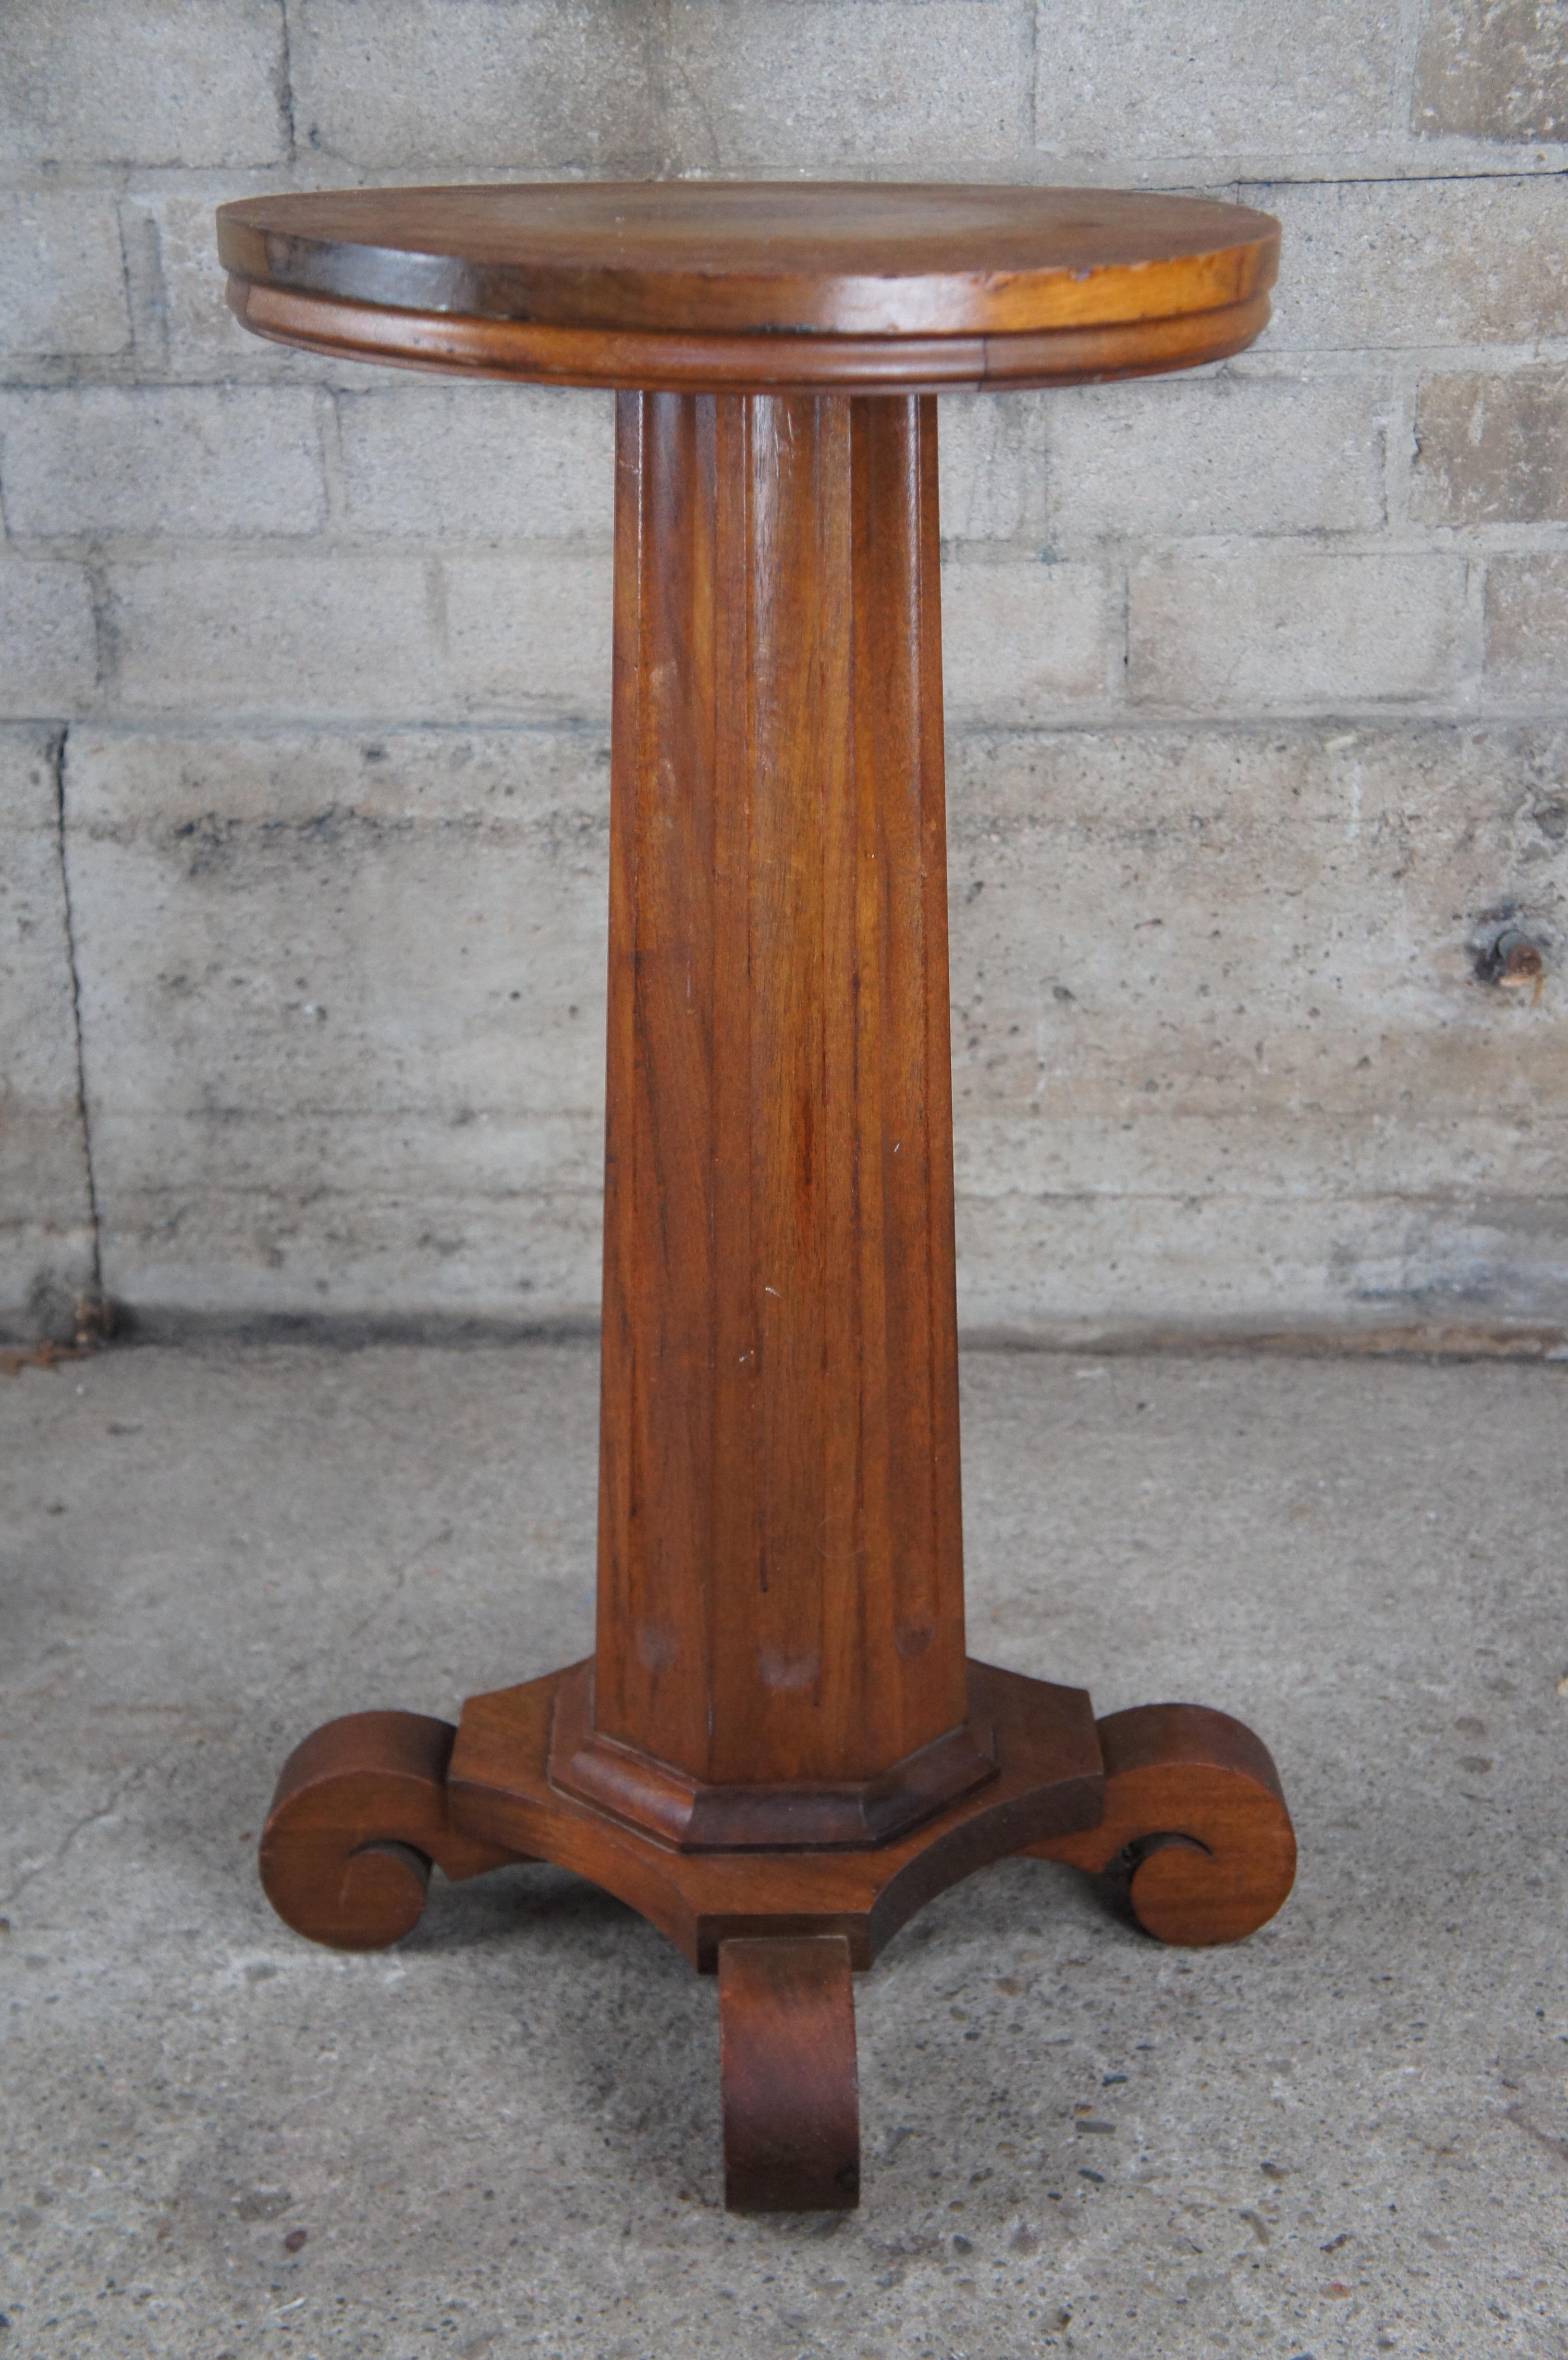 Antique American Classical Empire Mahogany Pedestal Table Sculpture Plant Stand For Sale 1